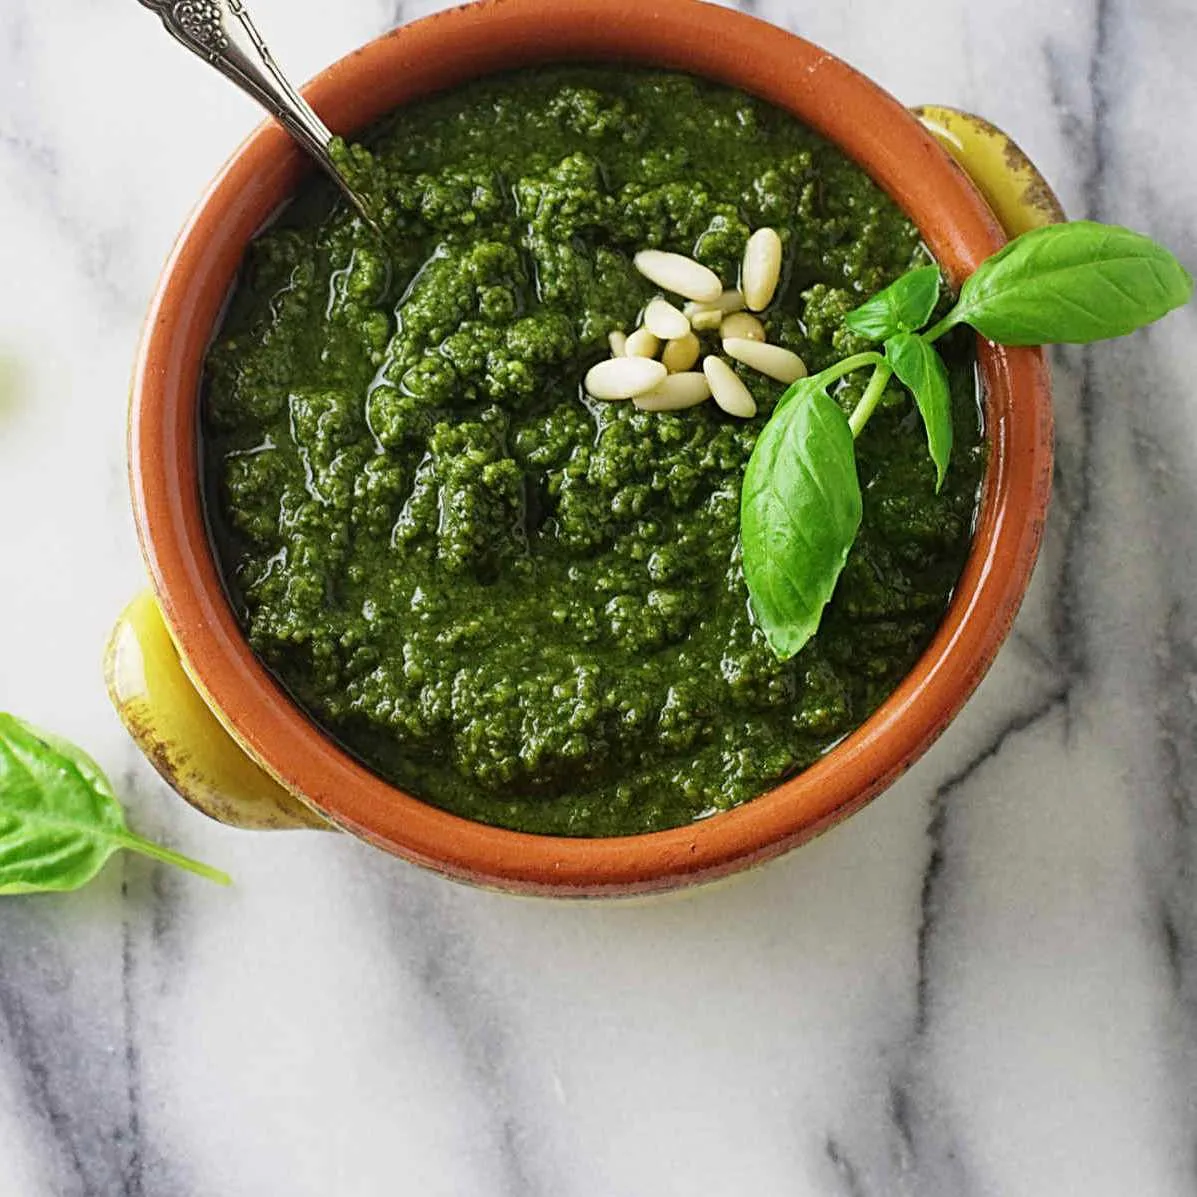 A serving dish filled with pesto.